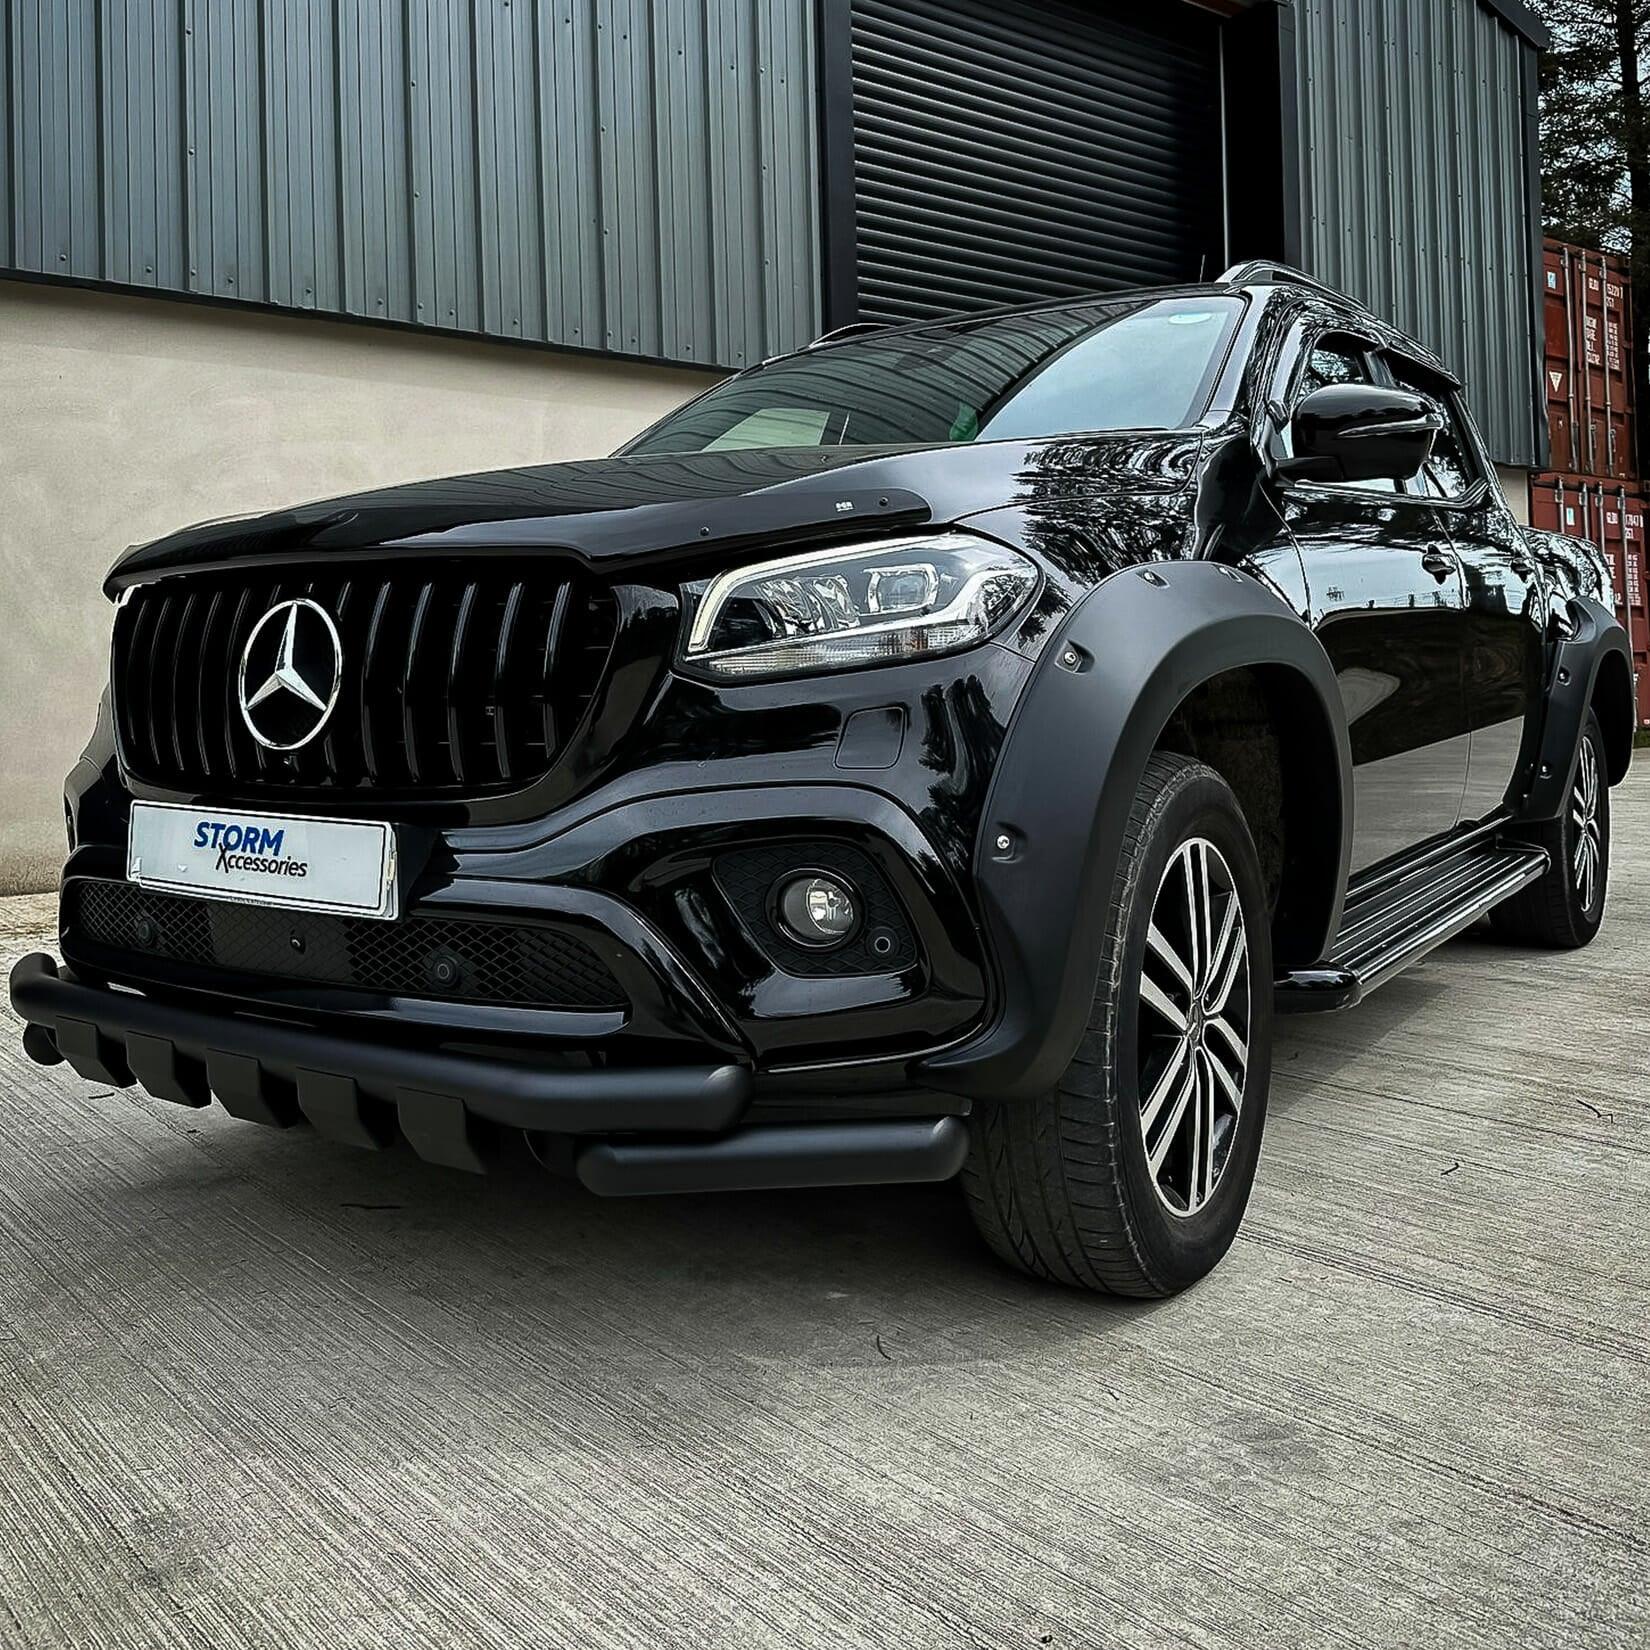 MERCEDES X-CLASS GRILLE - AMG STYLE IN GLOSS BLACK - Storm Xccessories2